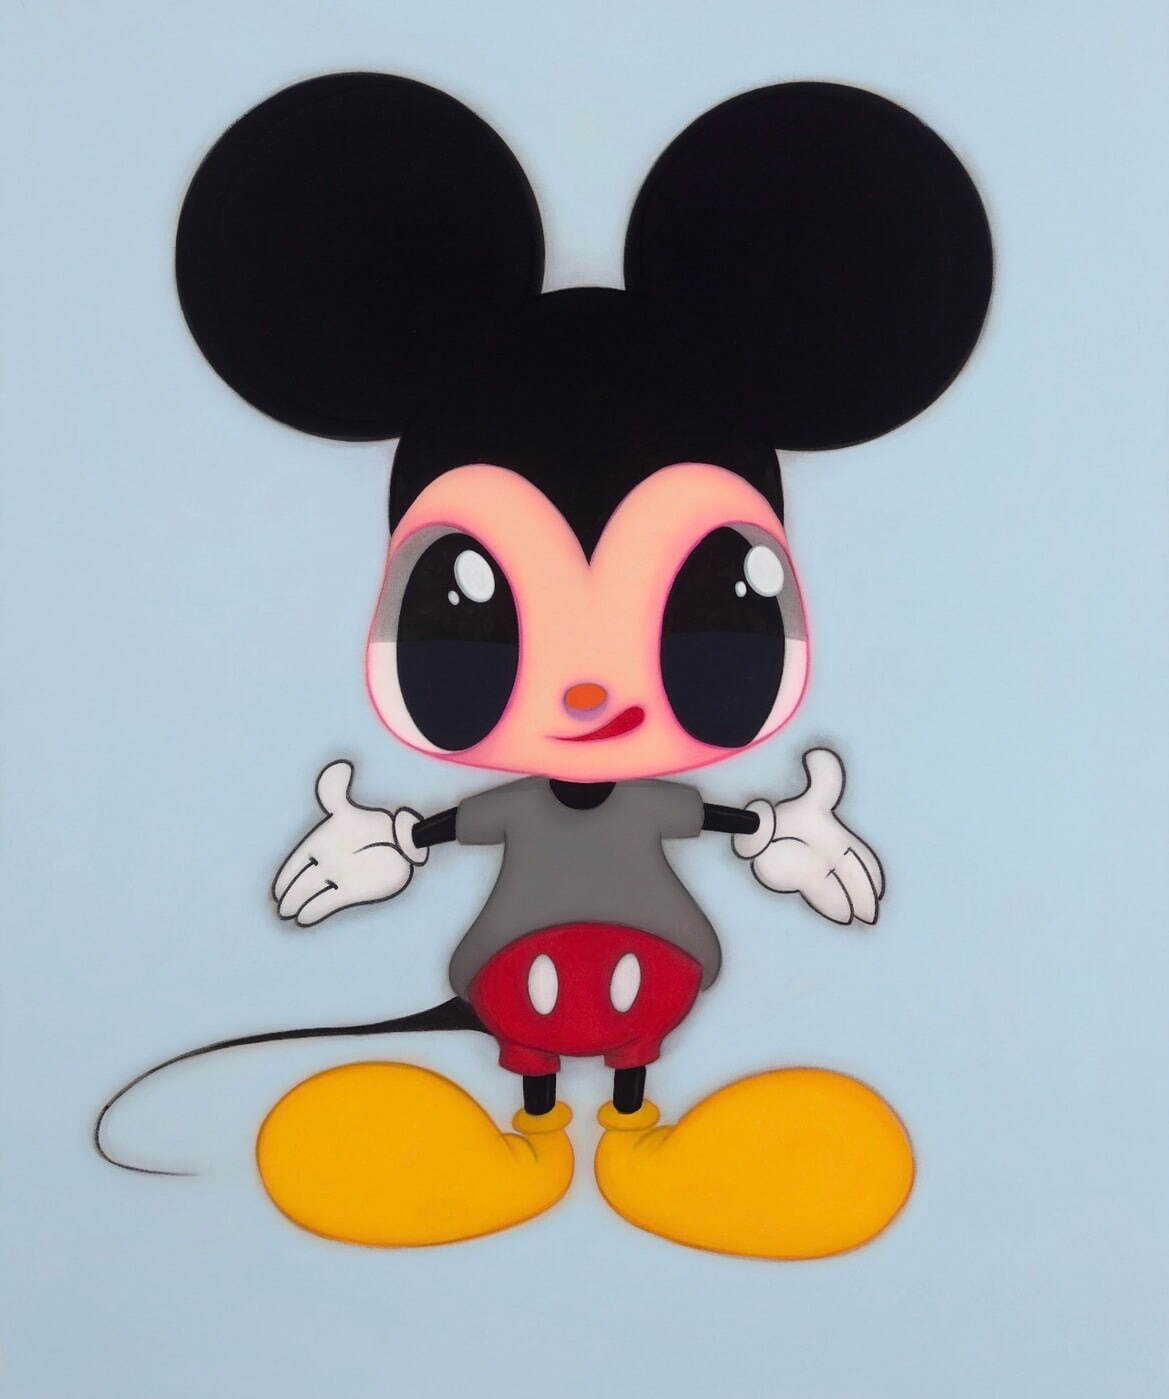 designed by Javier Calleja
nanzuka
「Mickey Mouse Now and Future」展 渋谷パルコ会場より